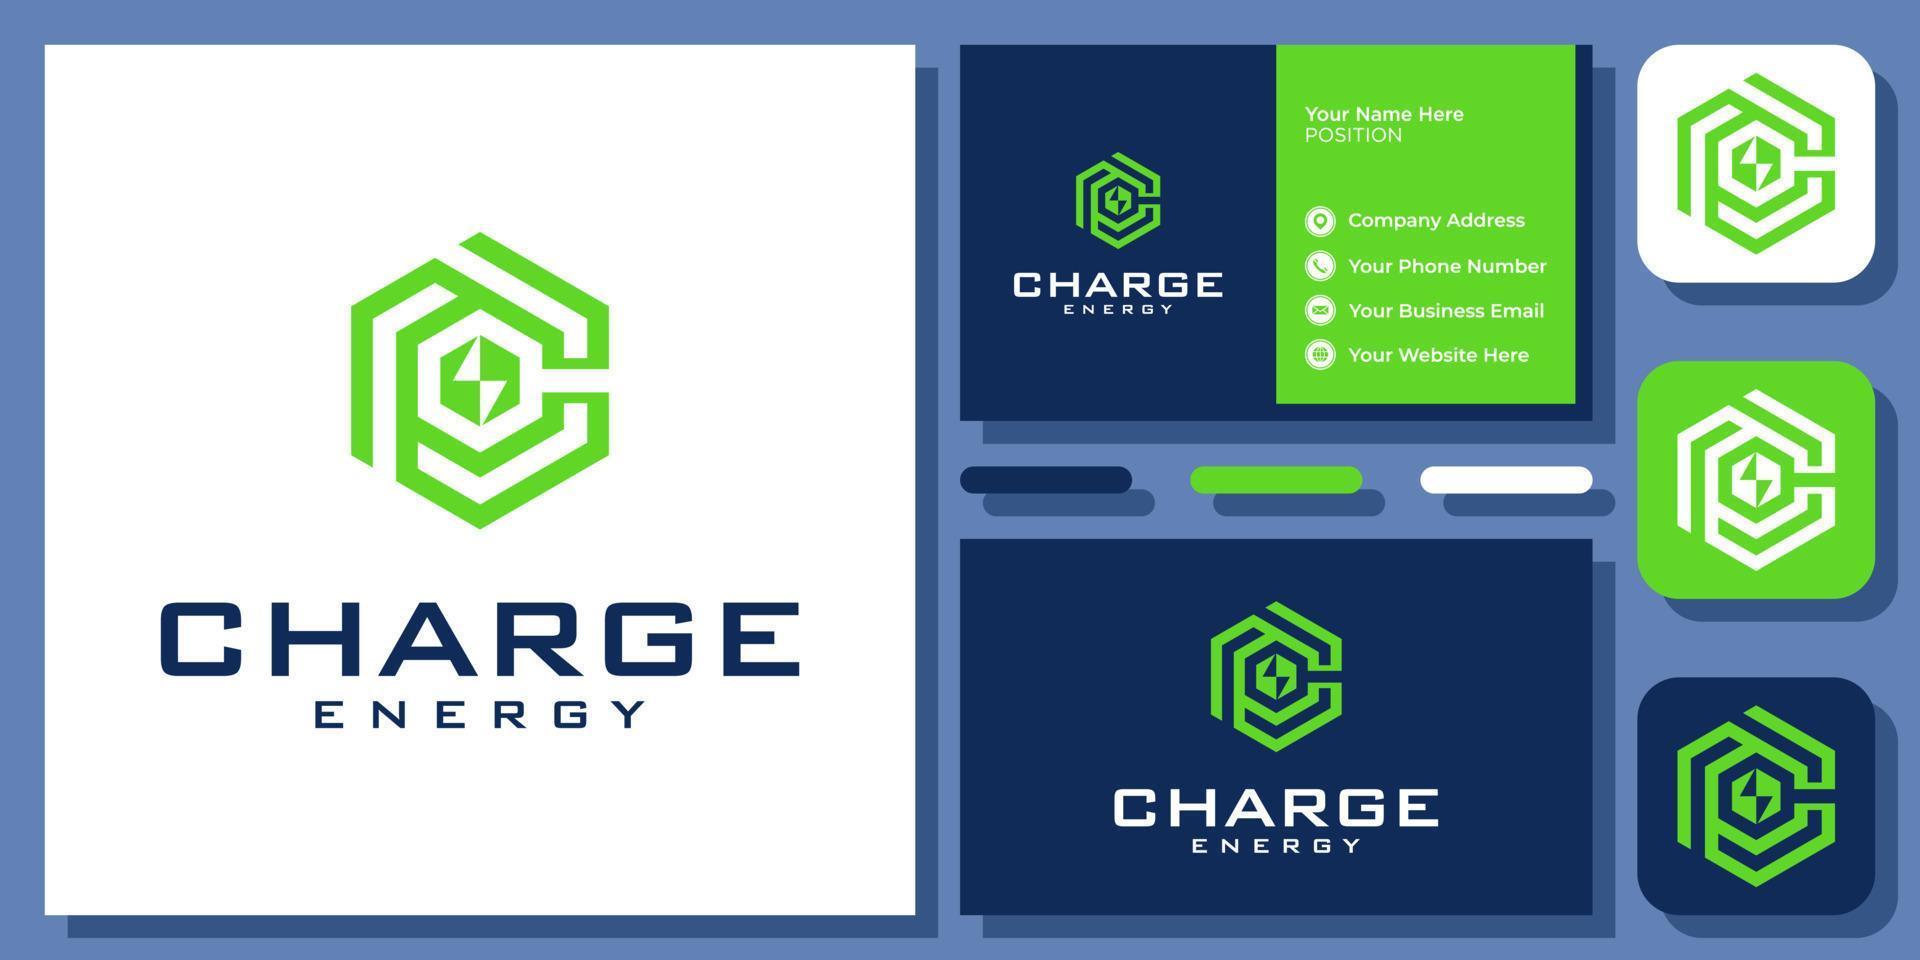 Initial Letter C Charge Energy Battery Power Electric Hexagon Vector Logo Design with Business Card